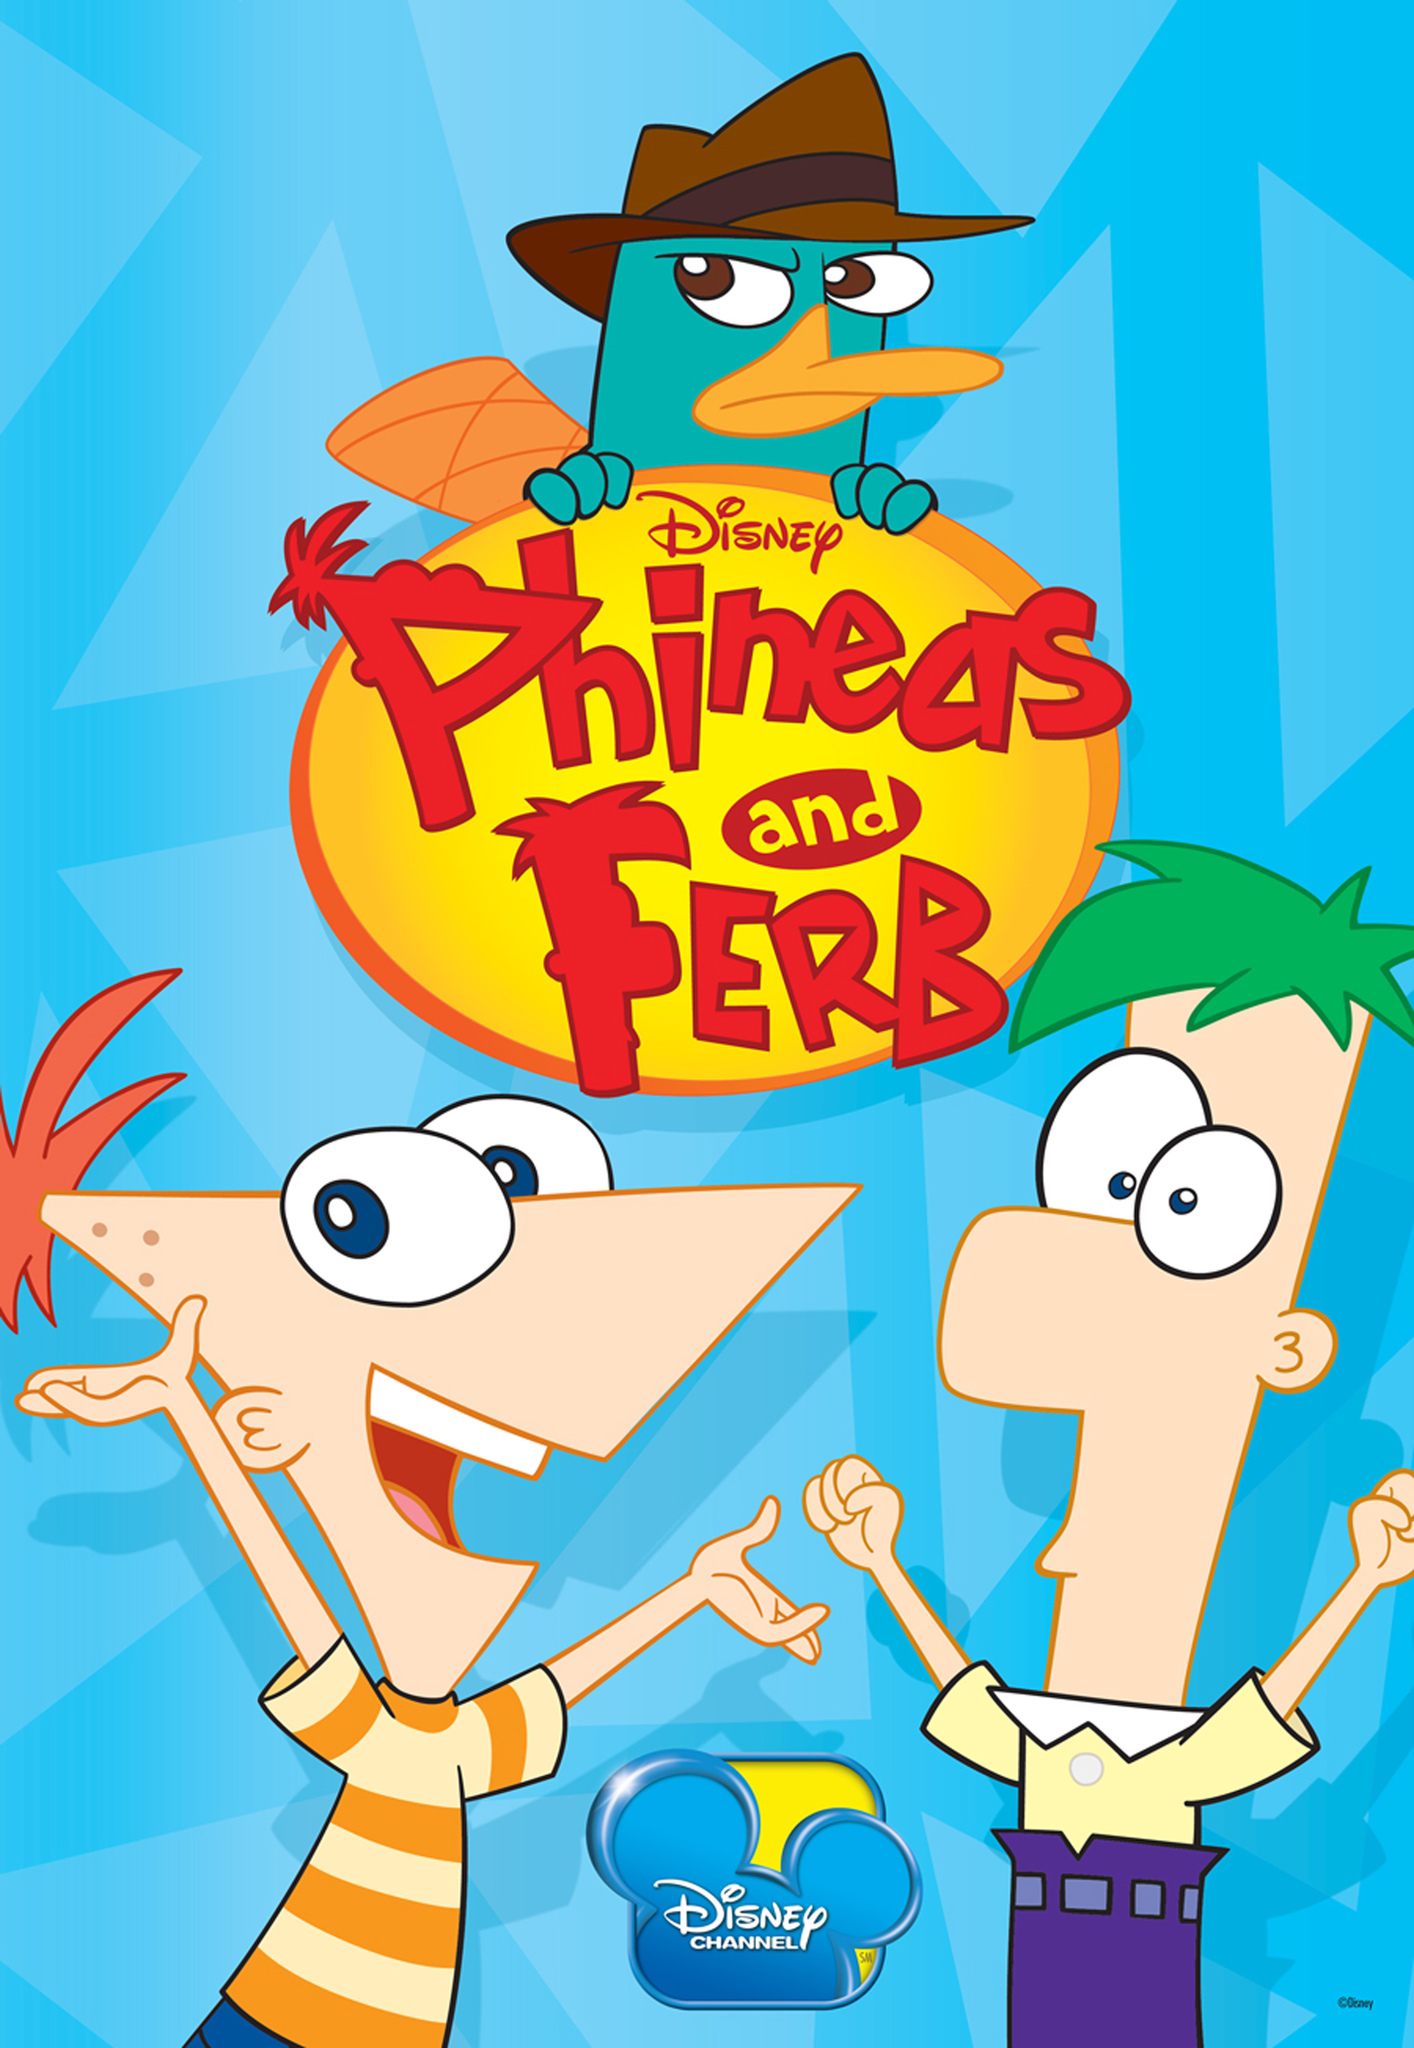 Phineas And Ferb: Mission Marvel